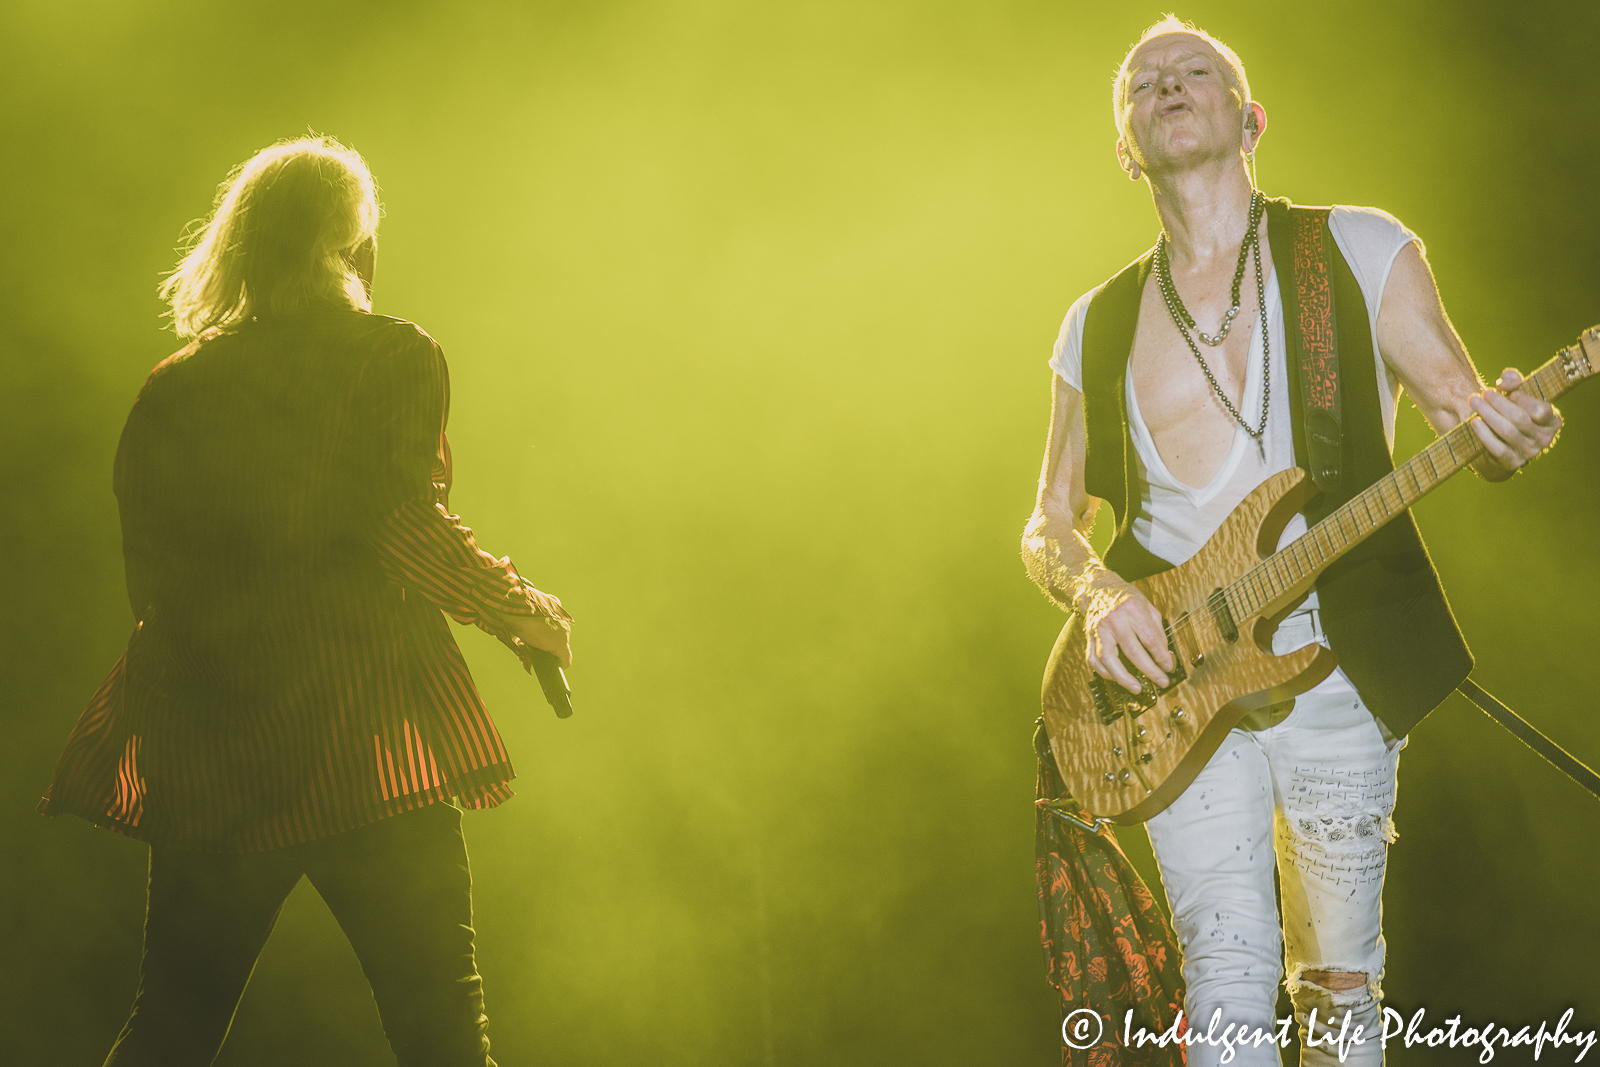 Guitarist Phil Collen of Def Leppard heading down the ramp during the band's concert at Kauffman Stadium in Kansas City, MO on July 19, 2022.